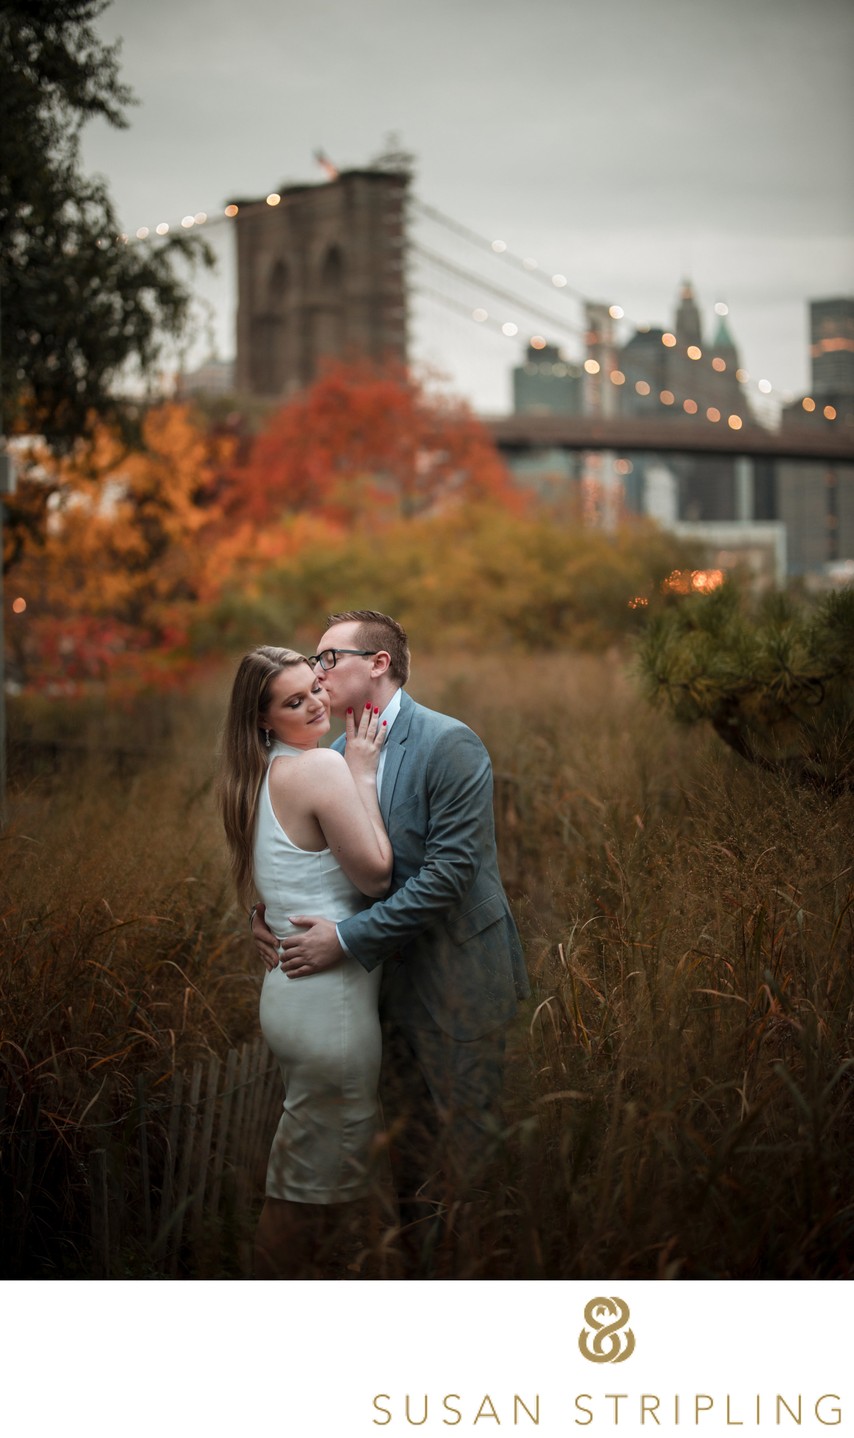 Rustic and Natural Engagement Photos in Dumbo Brooklyn